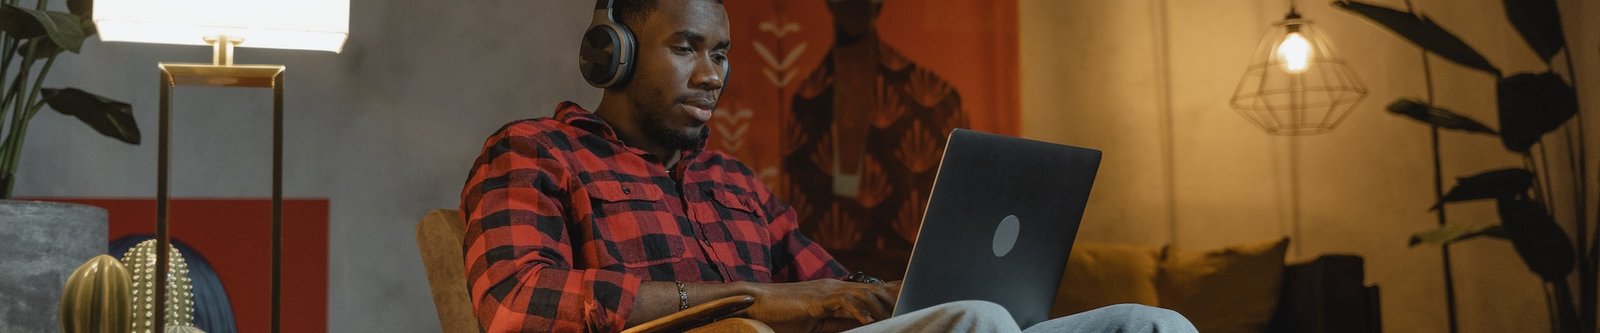 Man in red and black flannel shirt and headphones working in his living room on his laptop